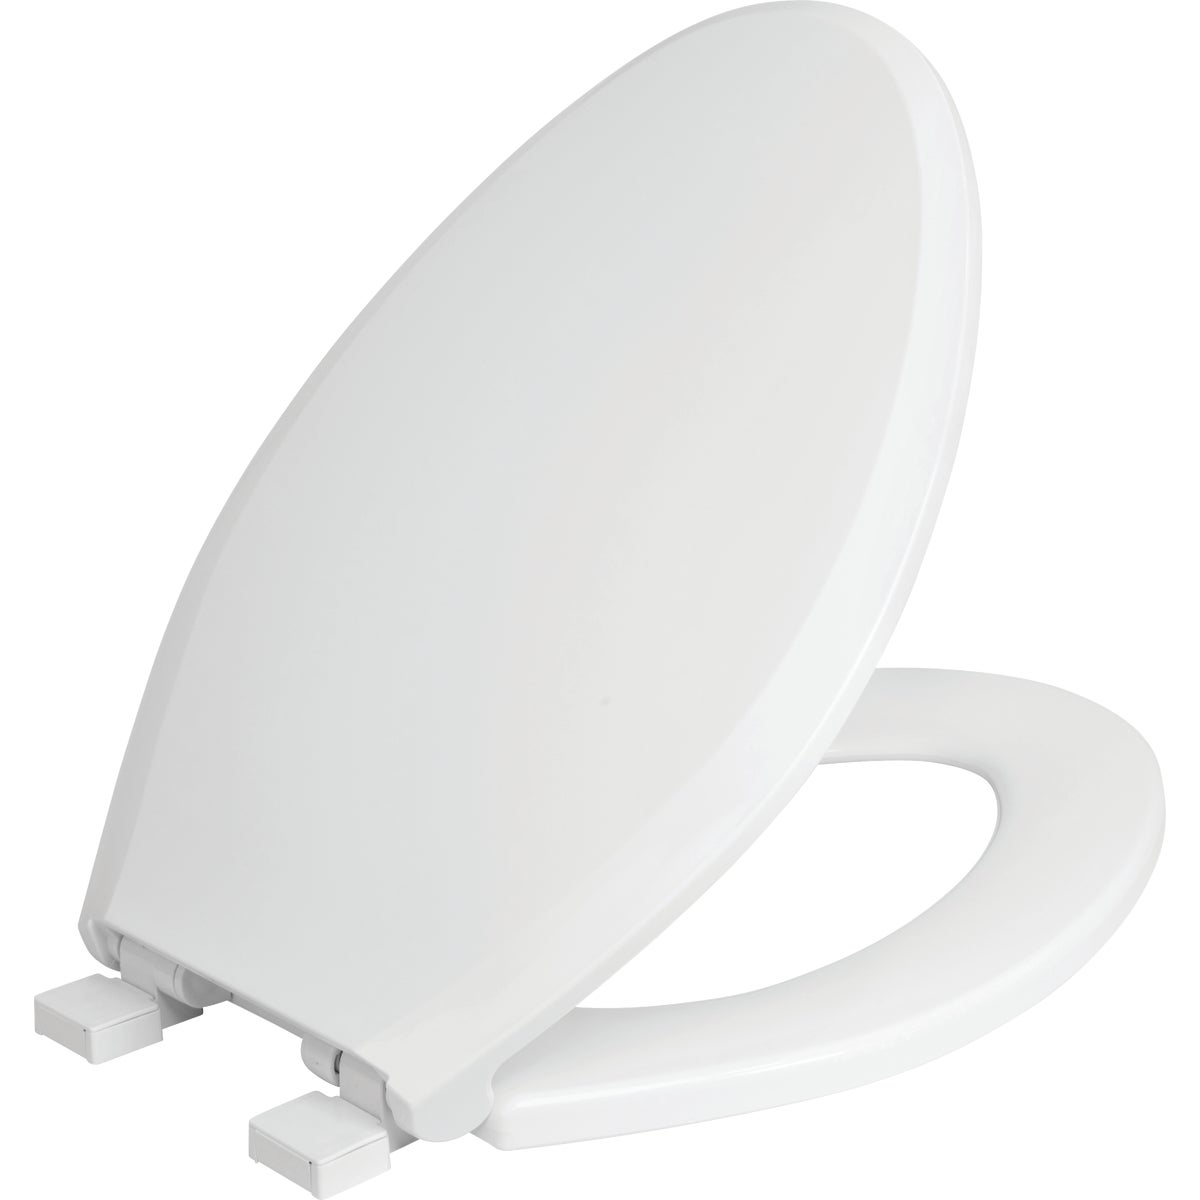 Centoco Elongated Closed Front White Plastic Toilet Seat with Slow Close